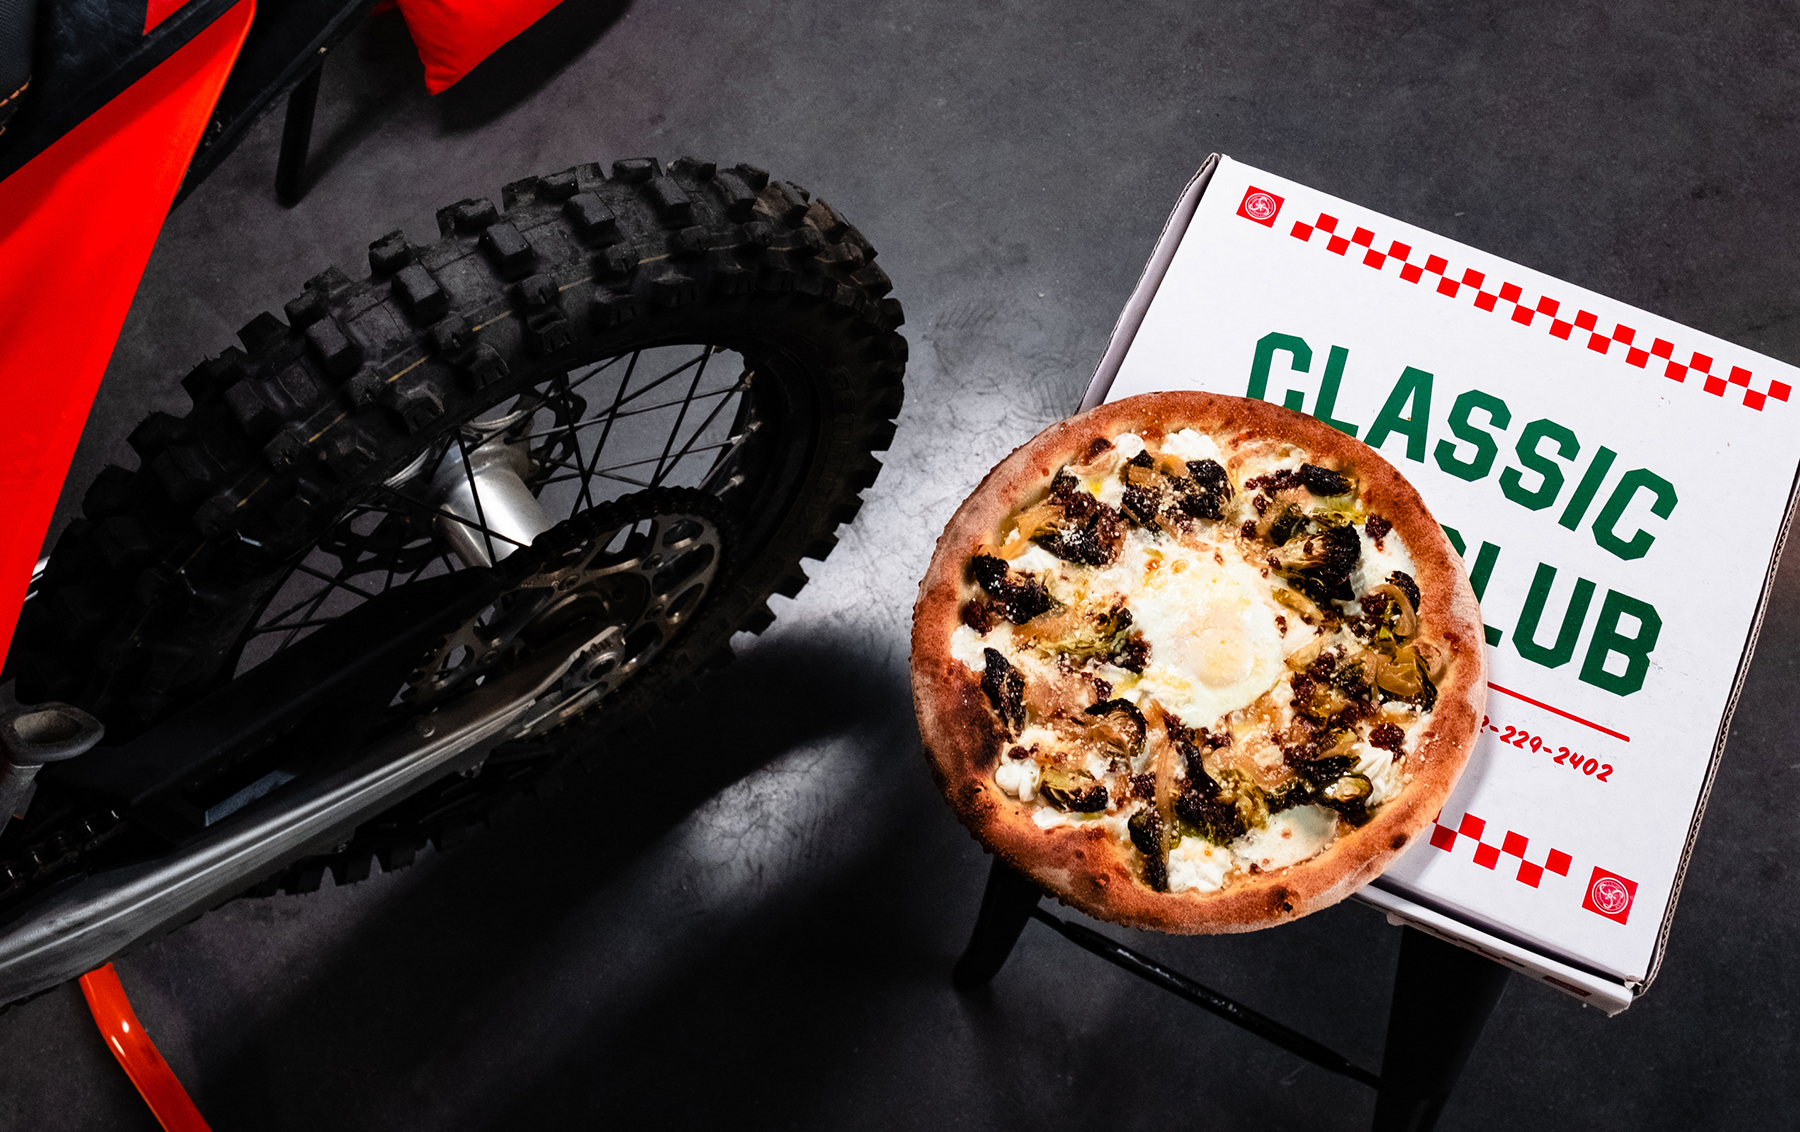 A lifestyle shot of a pizza sitting on top of the pizza box next to a dirtbike